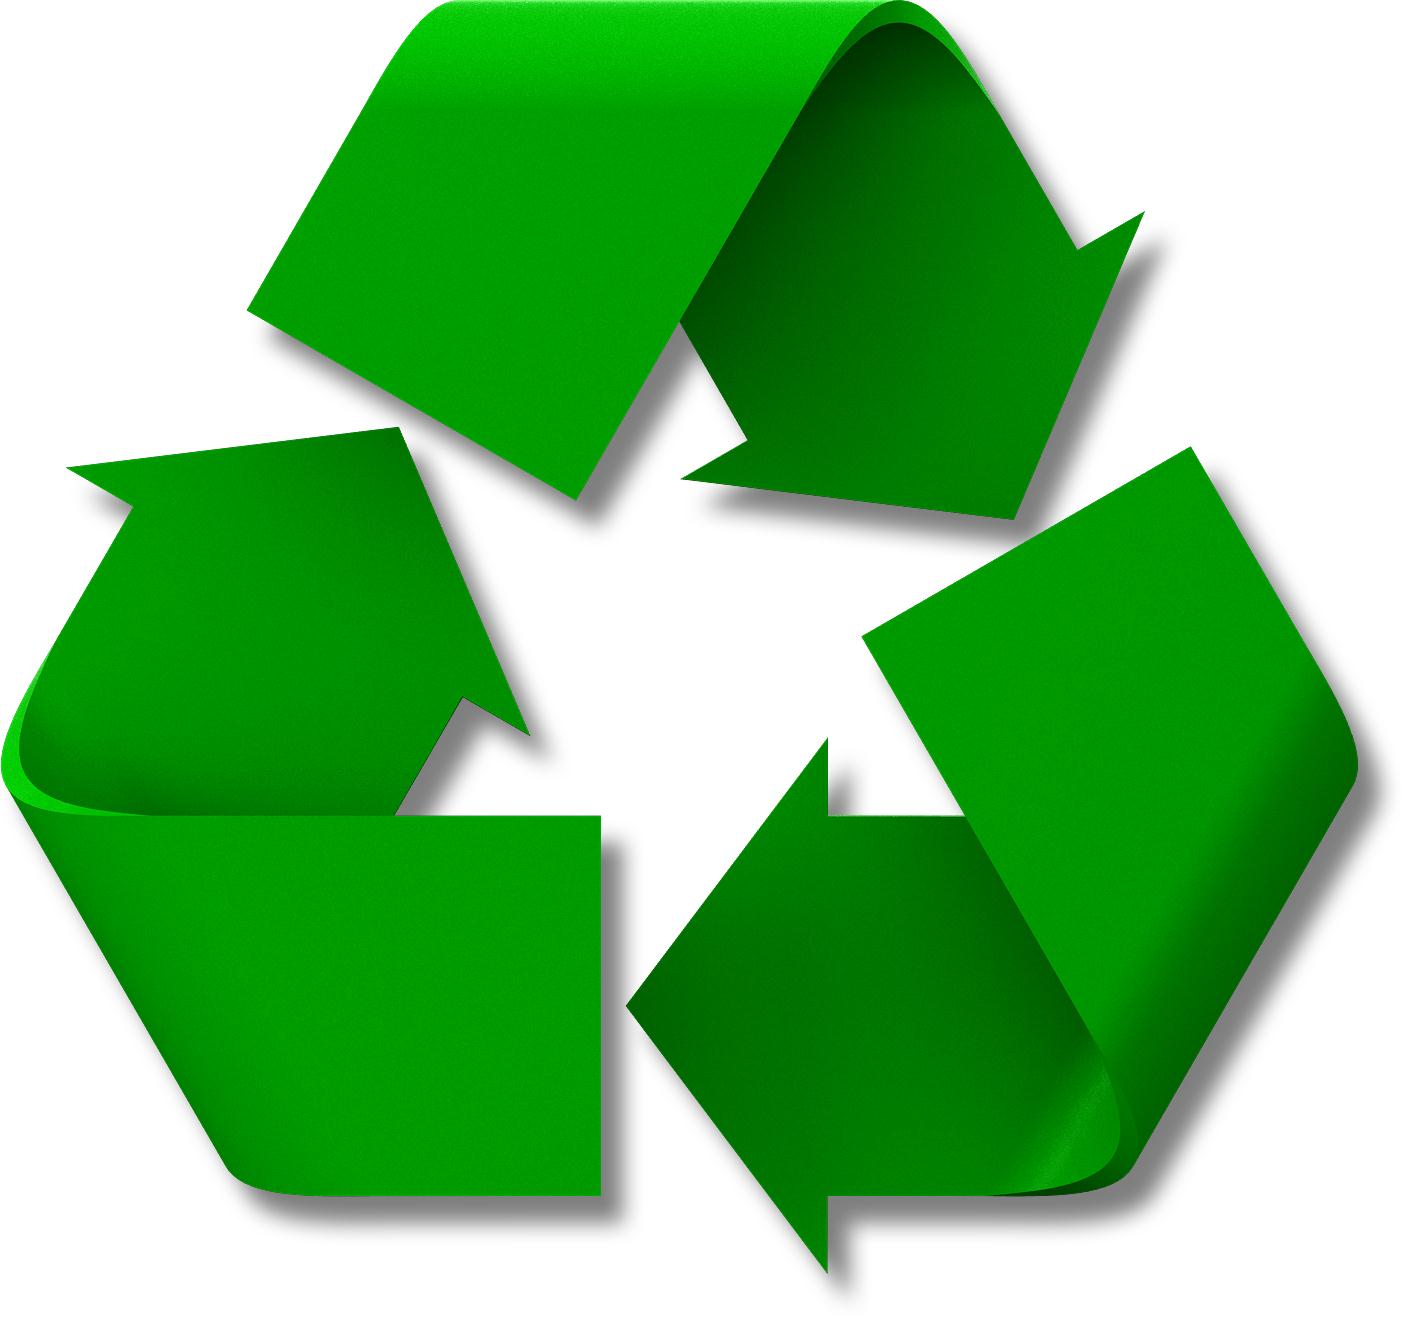 Picture Of Recycle Bin - ClipArt Best